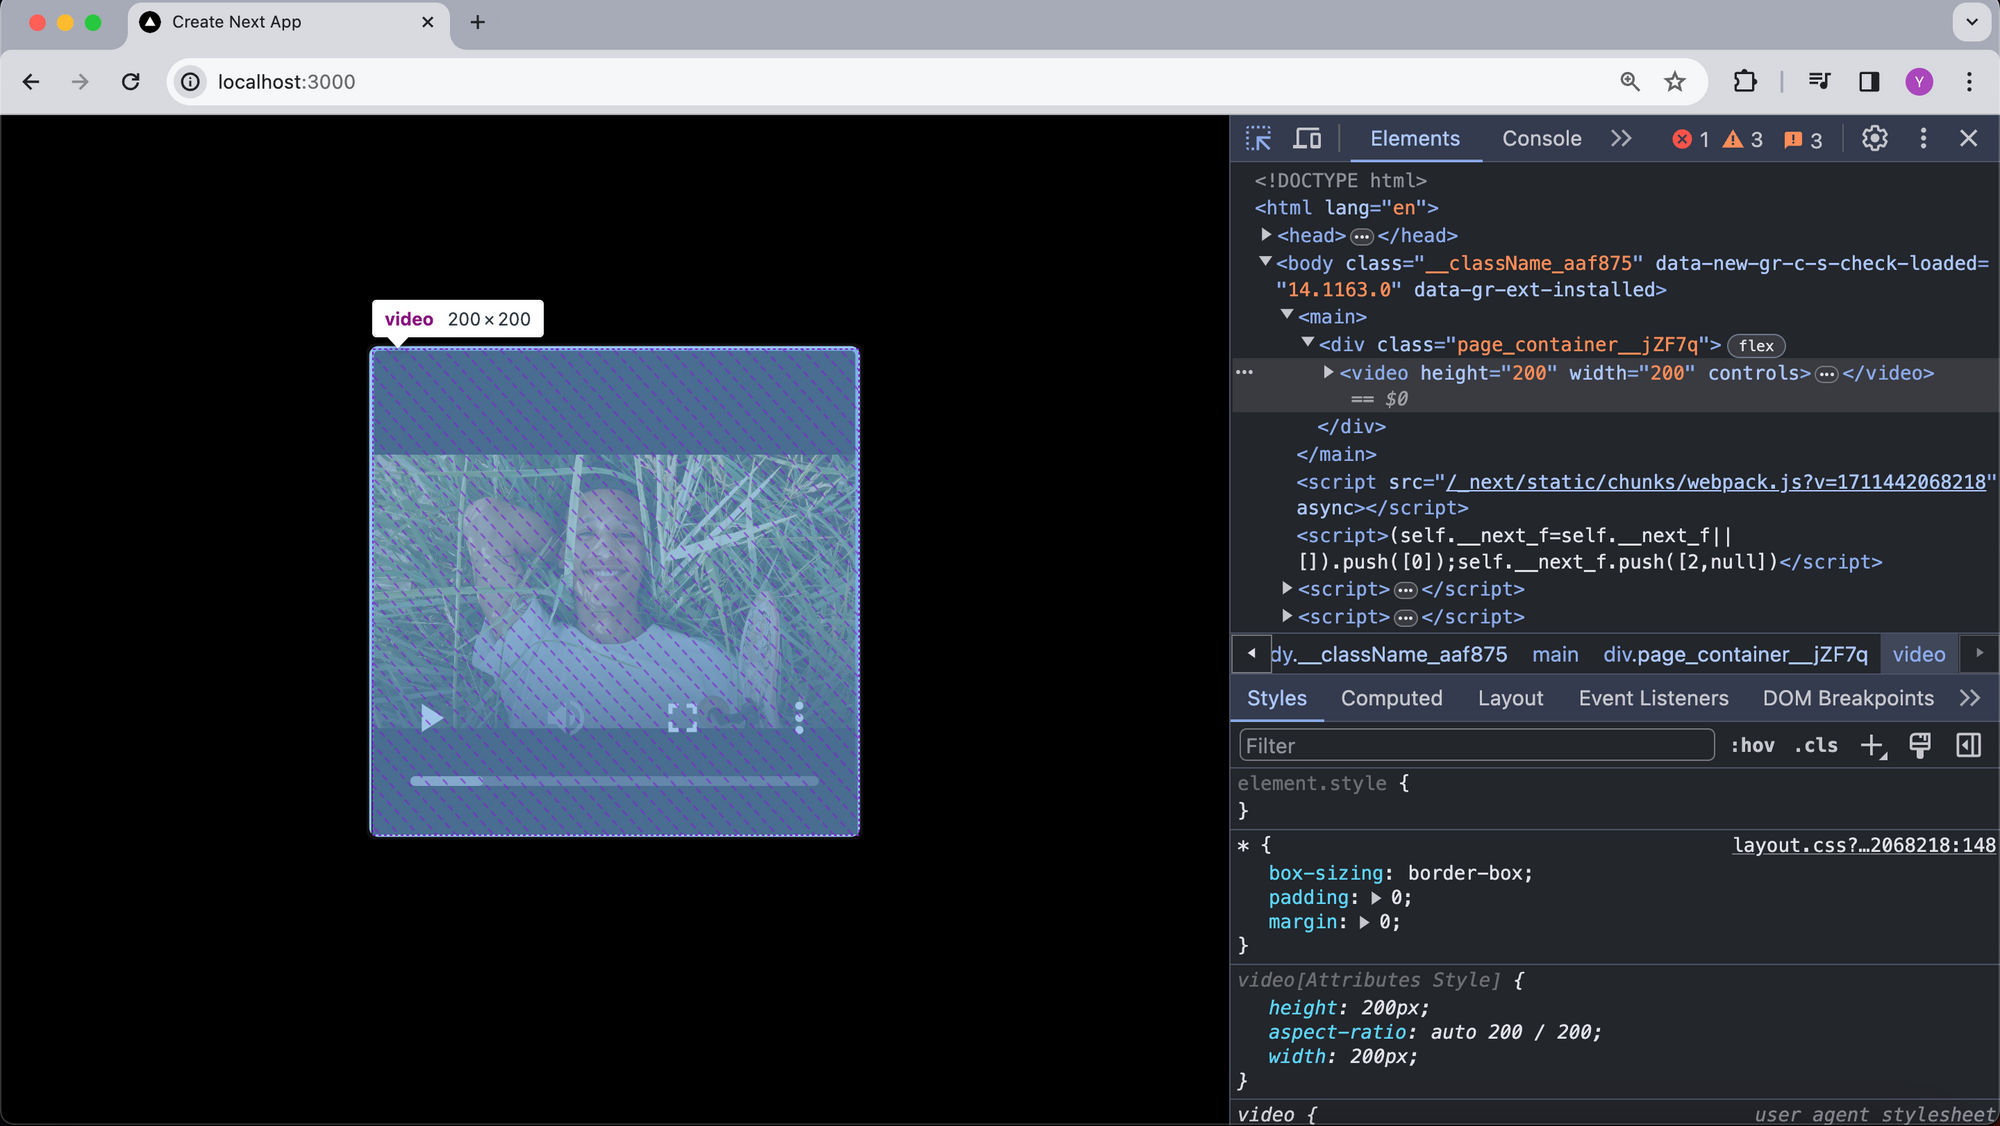 Adding video player in Next.js